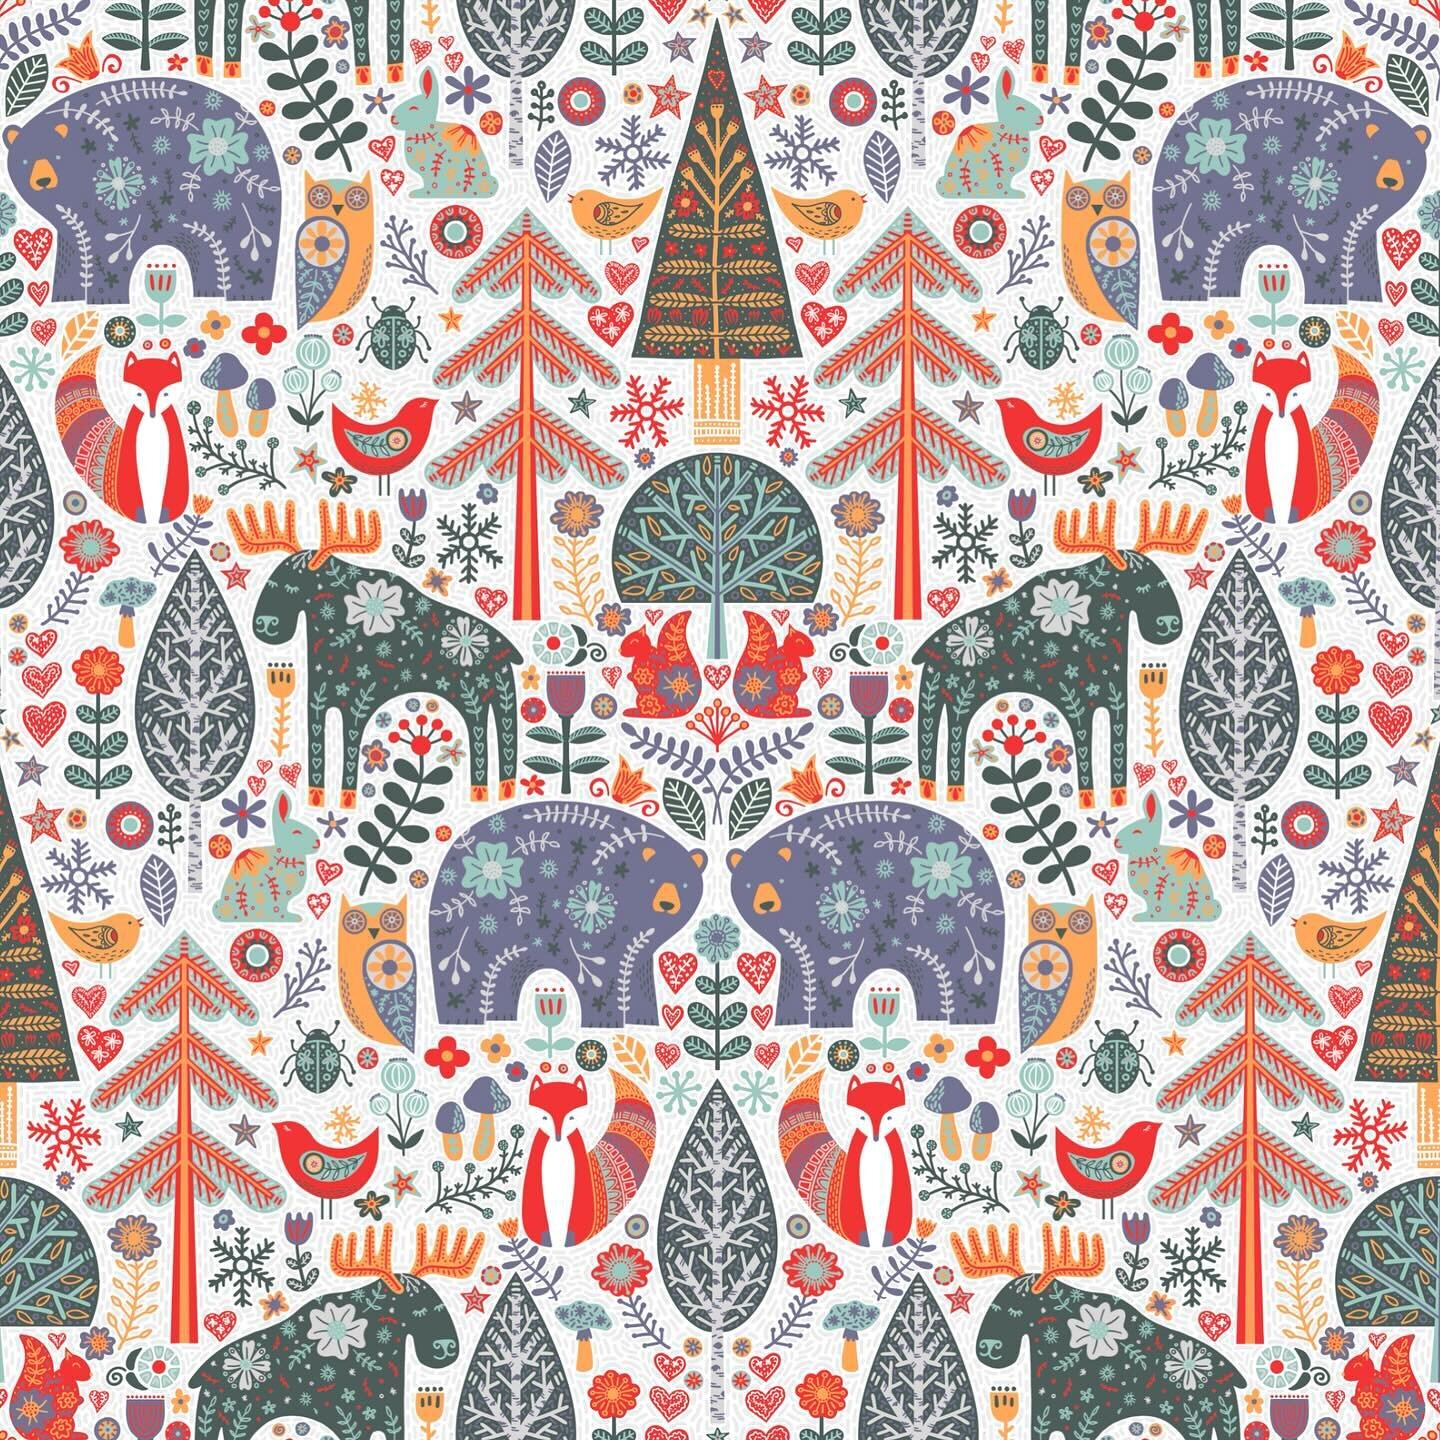 For my current submission to the #spoonflowerdesignchallenge, I had the most fun creating this Boreal Forest Biome, in Scandinavian Folk Art style. I tightened the palate as much as I could, down to six colors, and since I finished, &ldquo;A Scurry o